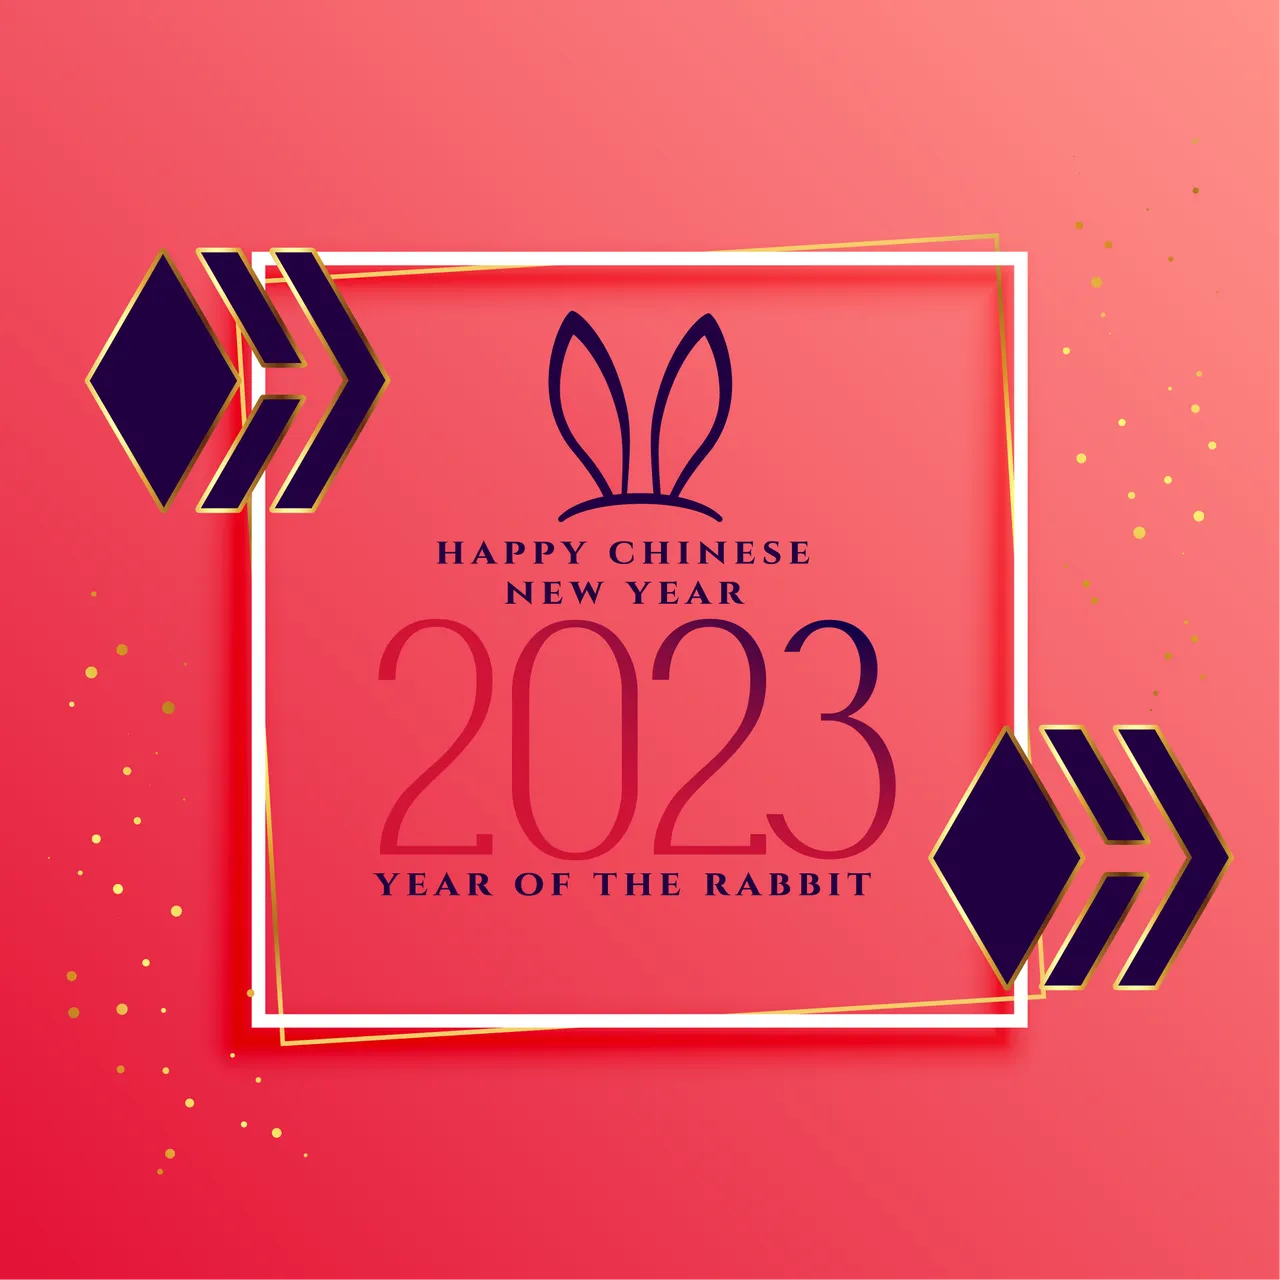 Happy Lunar new year graphic by Doze.png